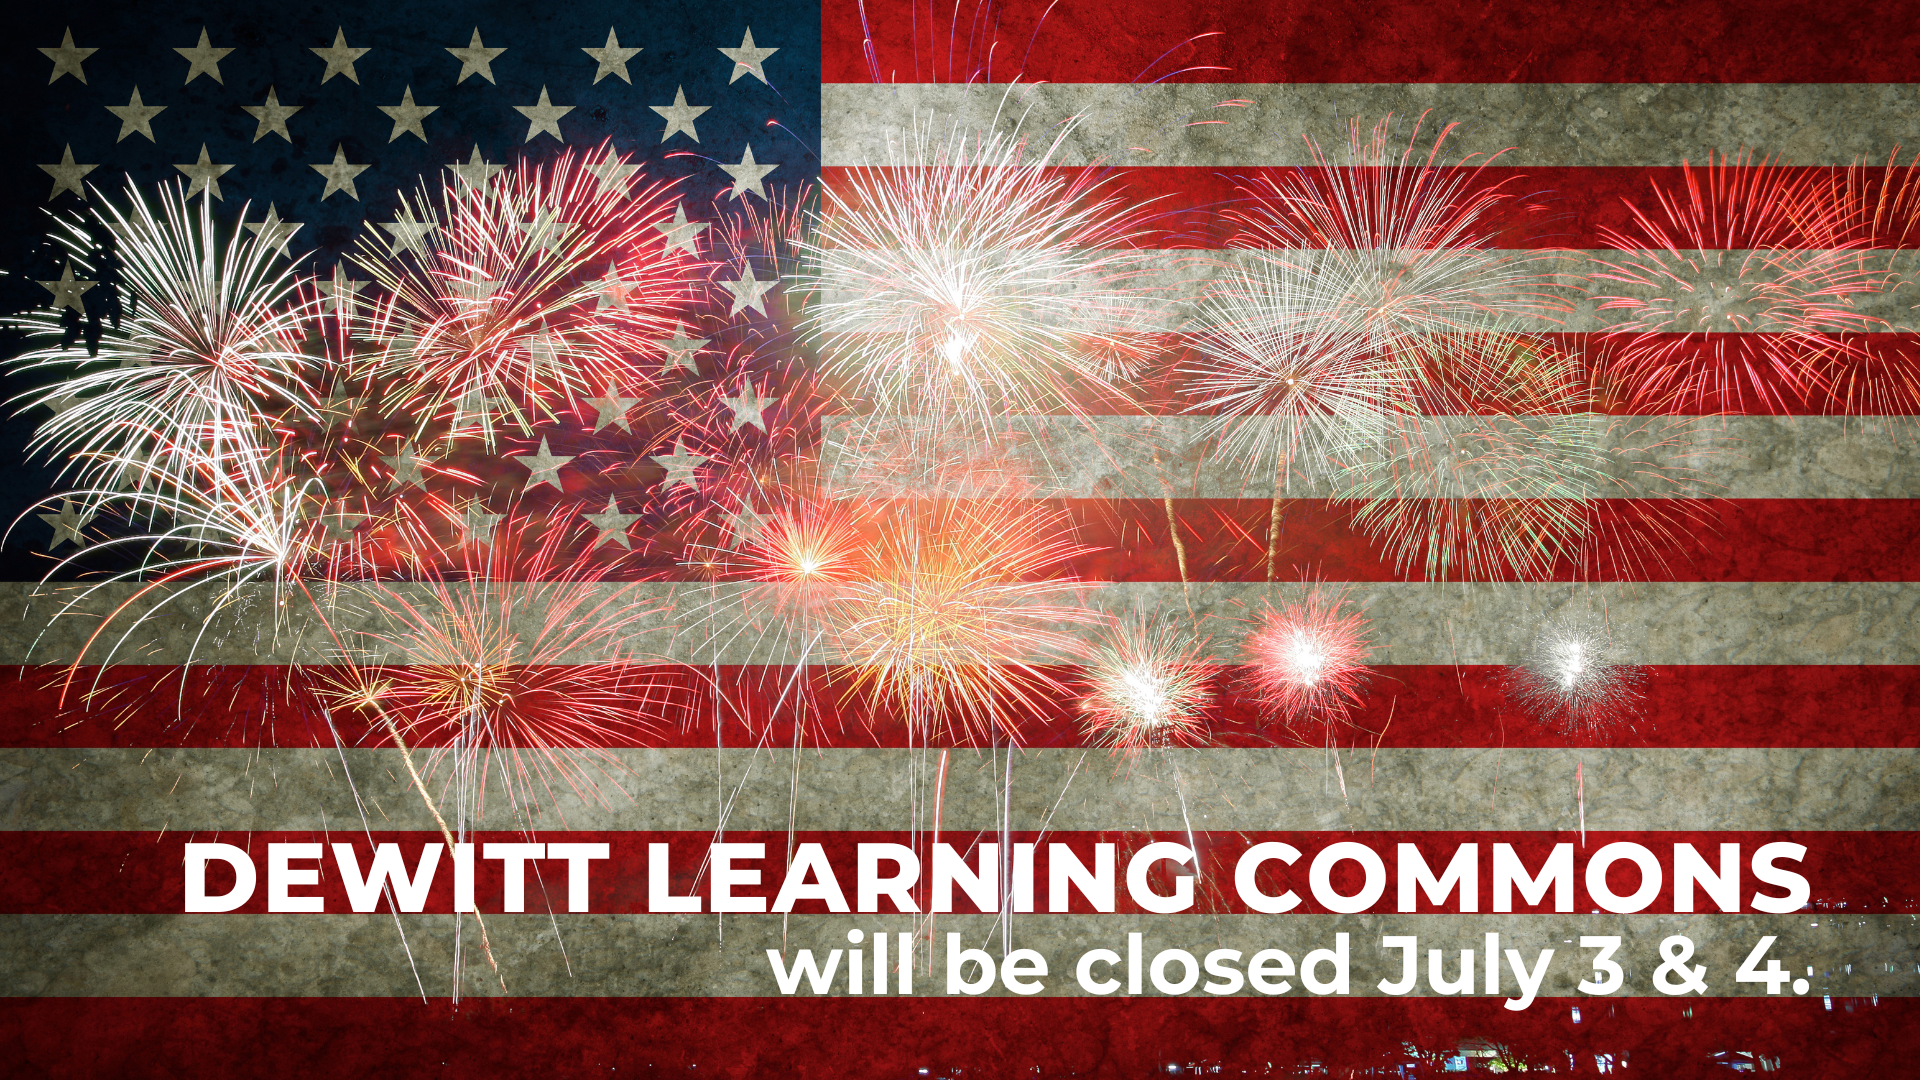 DeWitt Learning Commons will be closed July 3 & 4.